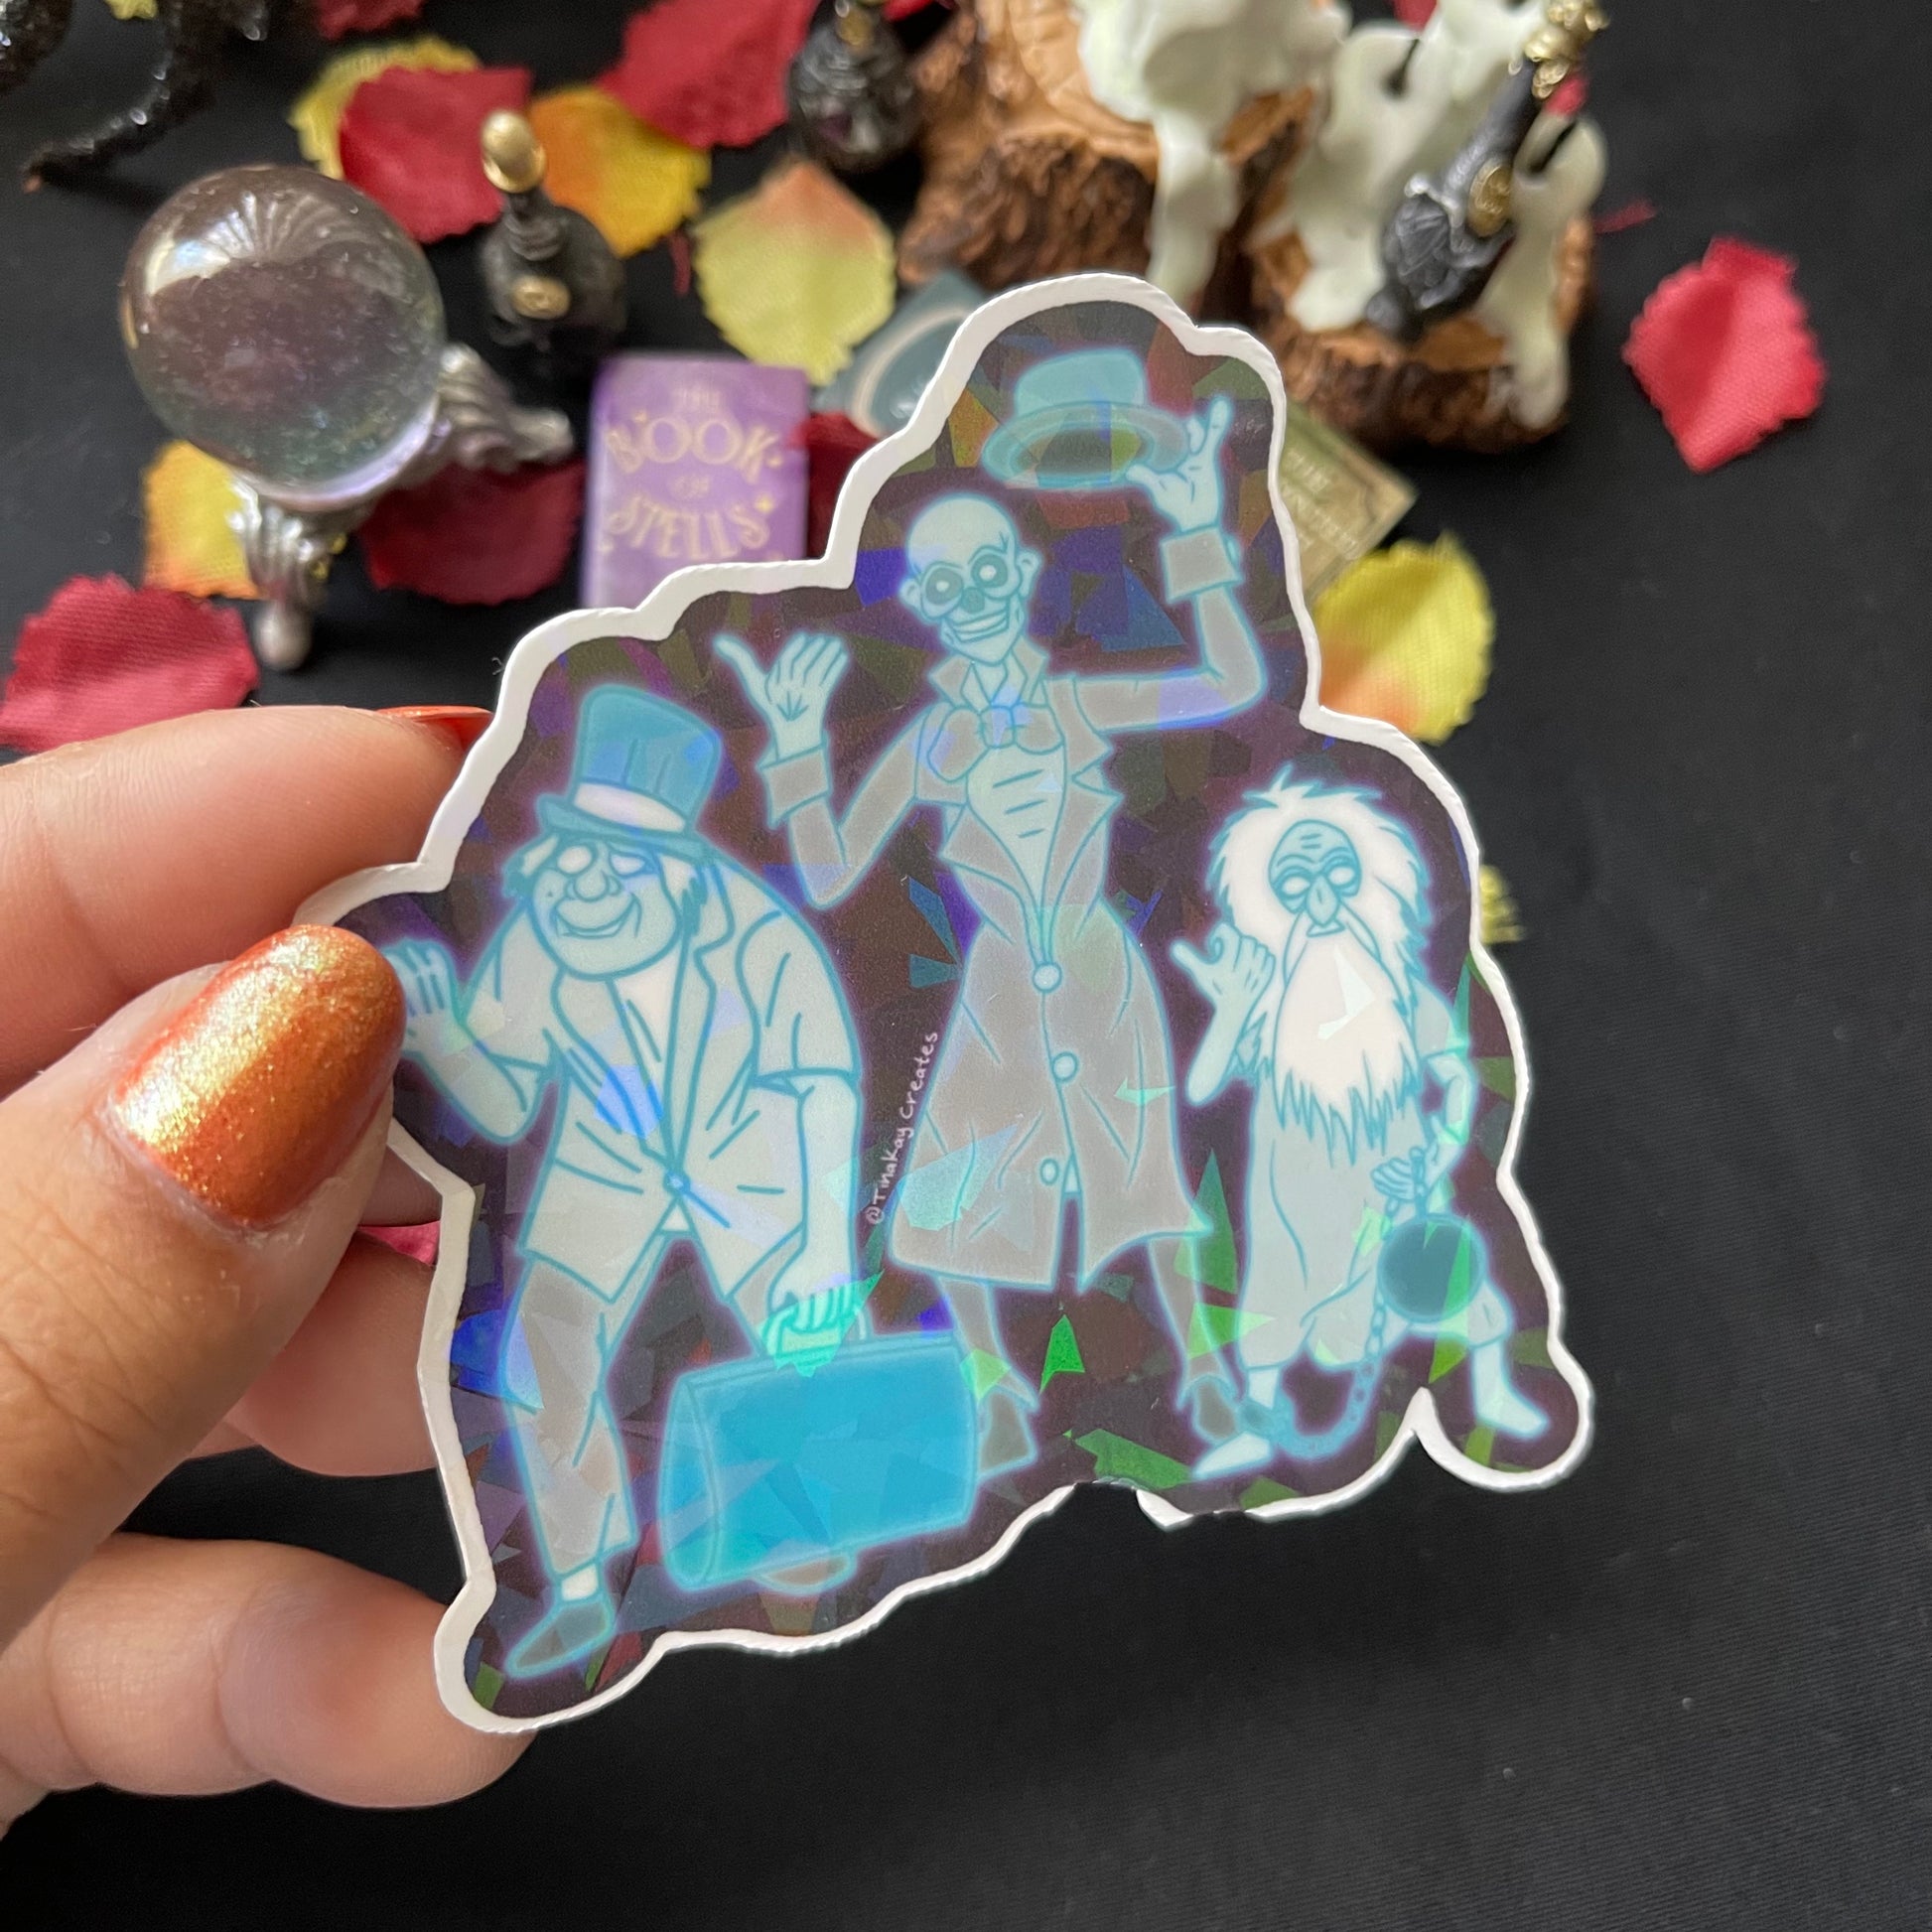 Haunted Figures Mansion Leota, Hitch Hiking Ghosts, Constance the Bride Waterproof Stickers - TinakayCreations